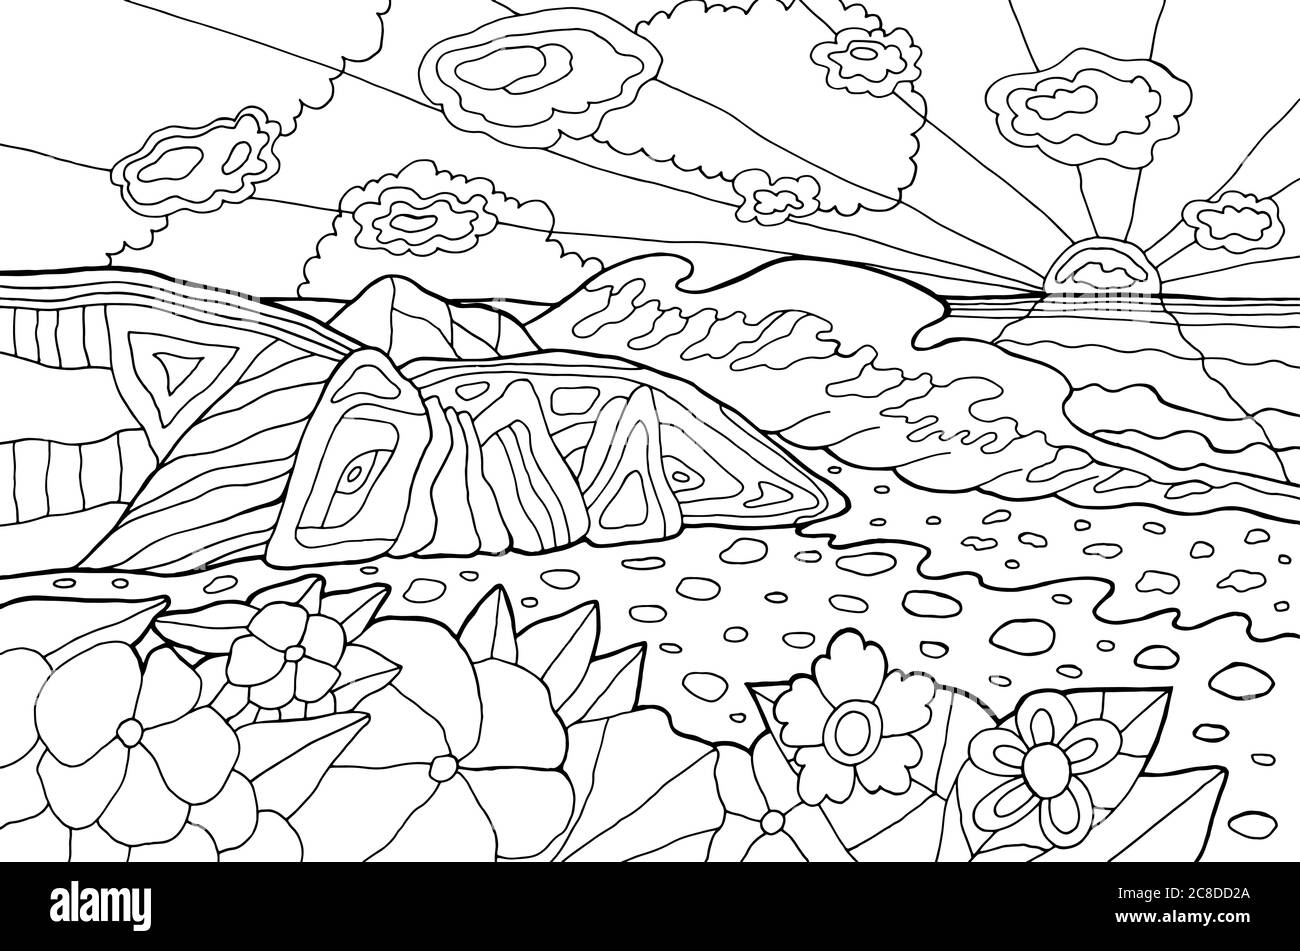 Psychedelic Illustration With Seaside Landscape Ocean Sunset Line Art Coloring Page For Adults Hippie 60s Artwork Vector Illustration Stock Vector Image Art Alamy